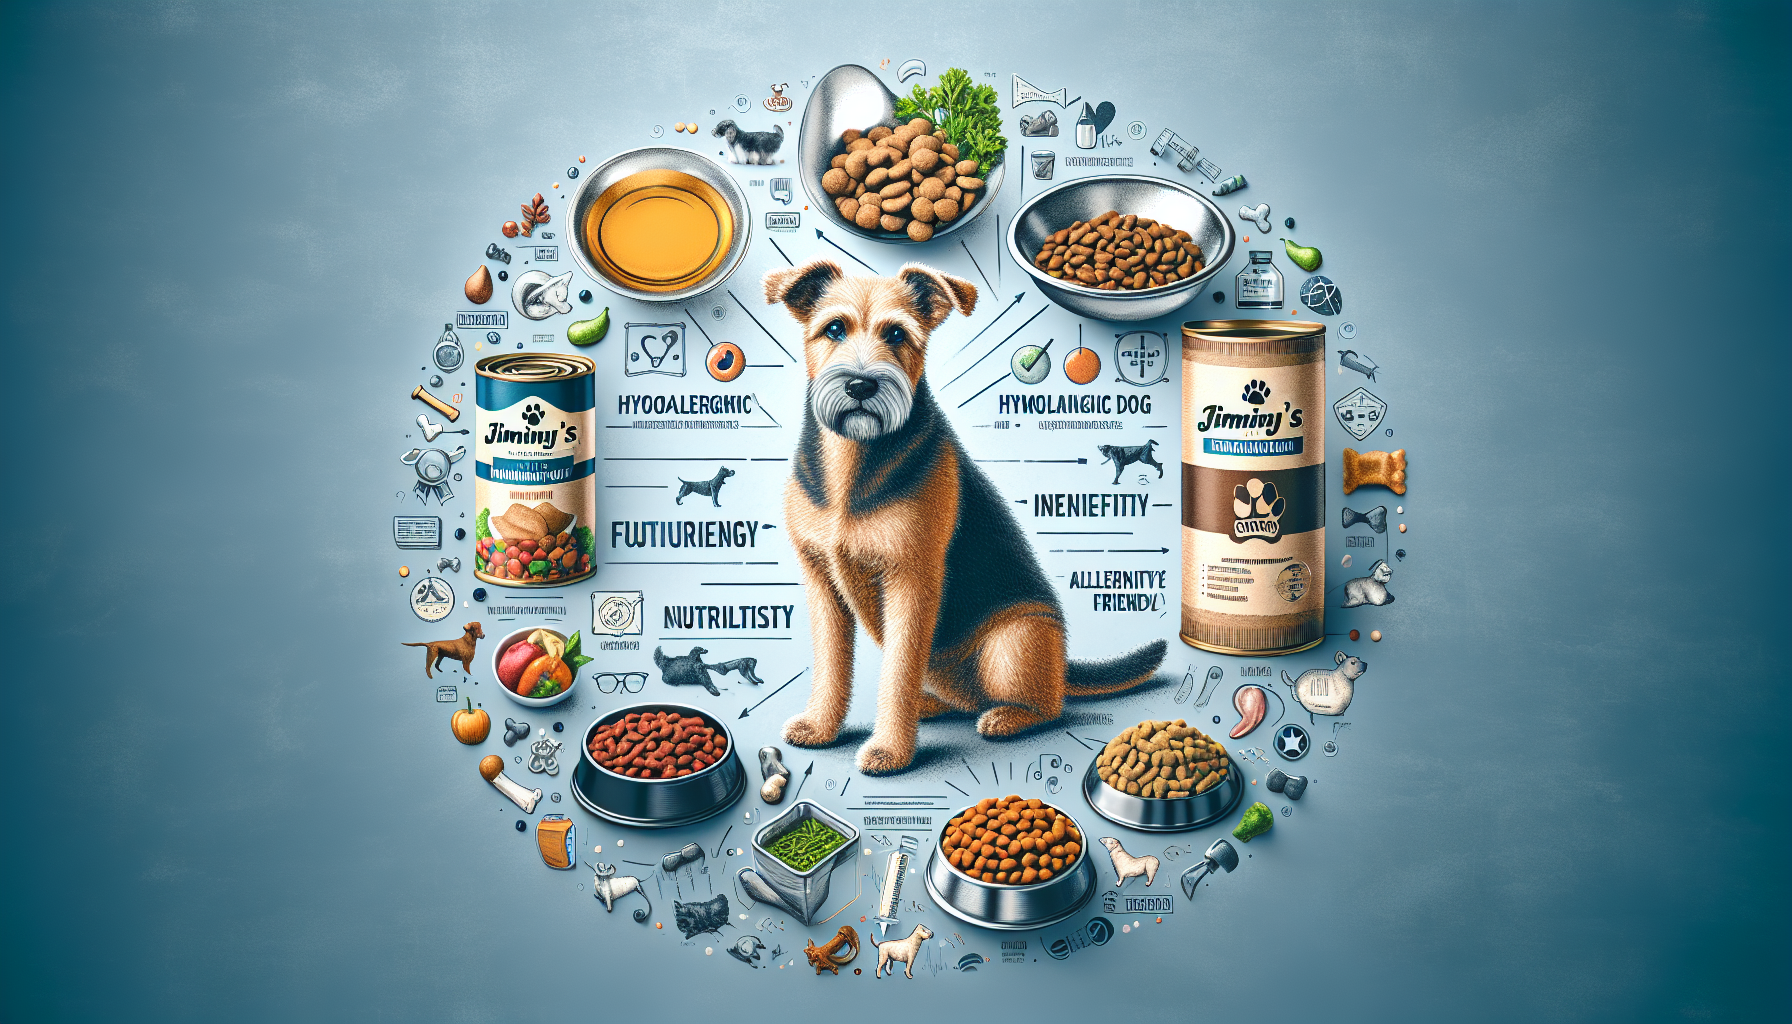 Jiminy’s Hypoallergenic Dog Food Review